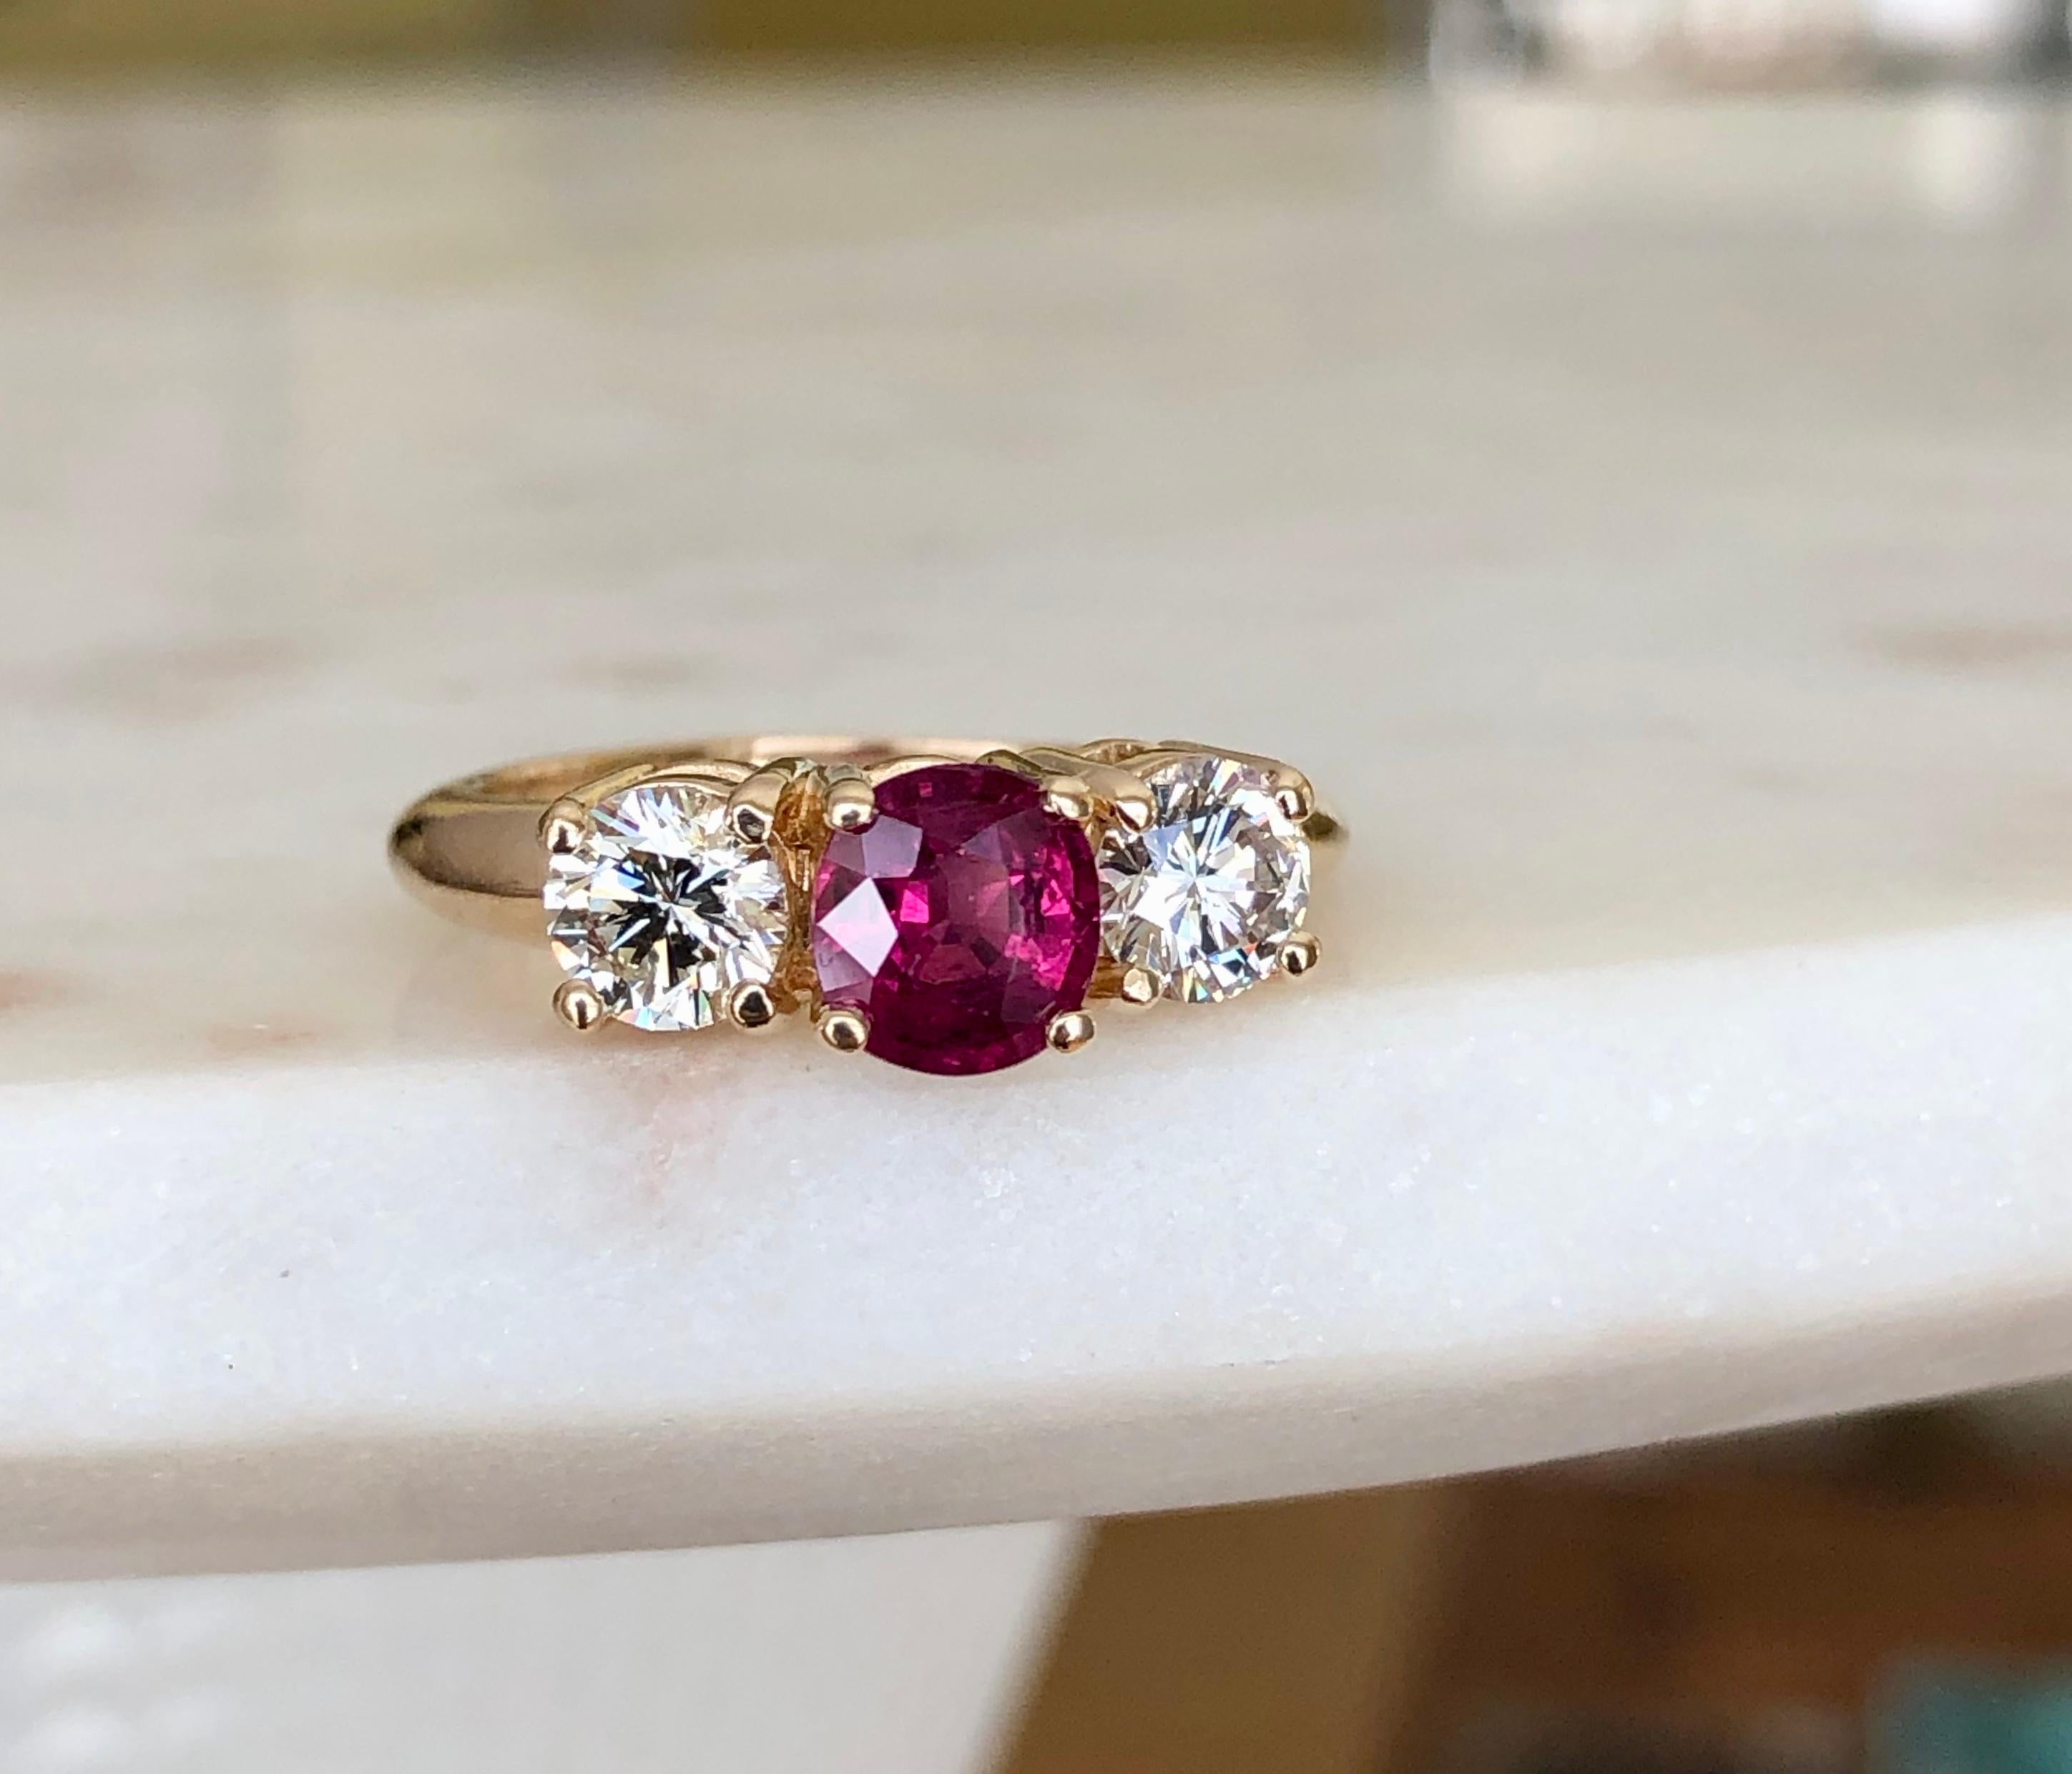 This classic trilogy engagement ring stars a natural deep, rich red ruby weighing Approx. 1.20 carat flanked by a matched pair of brilliant-cut diamonds H-SI1 weighing over 0.90 carat. This elegant ring is crafted in a timeless, traditional style